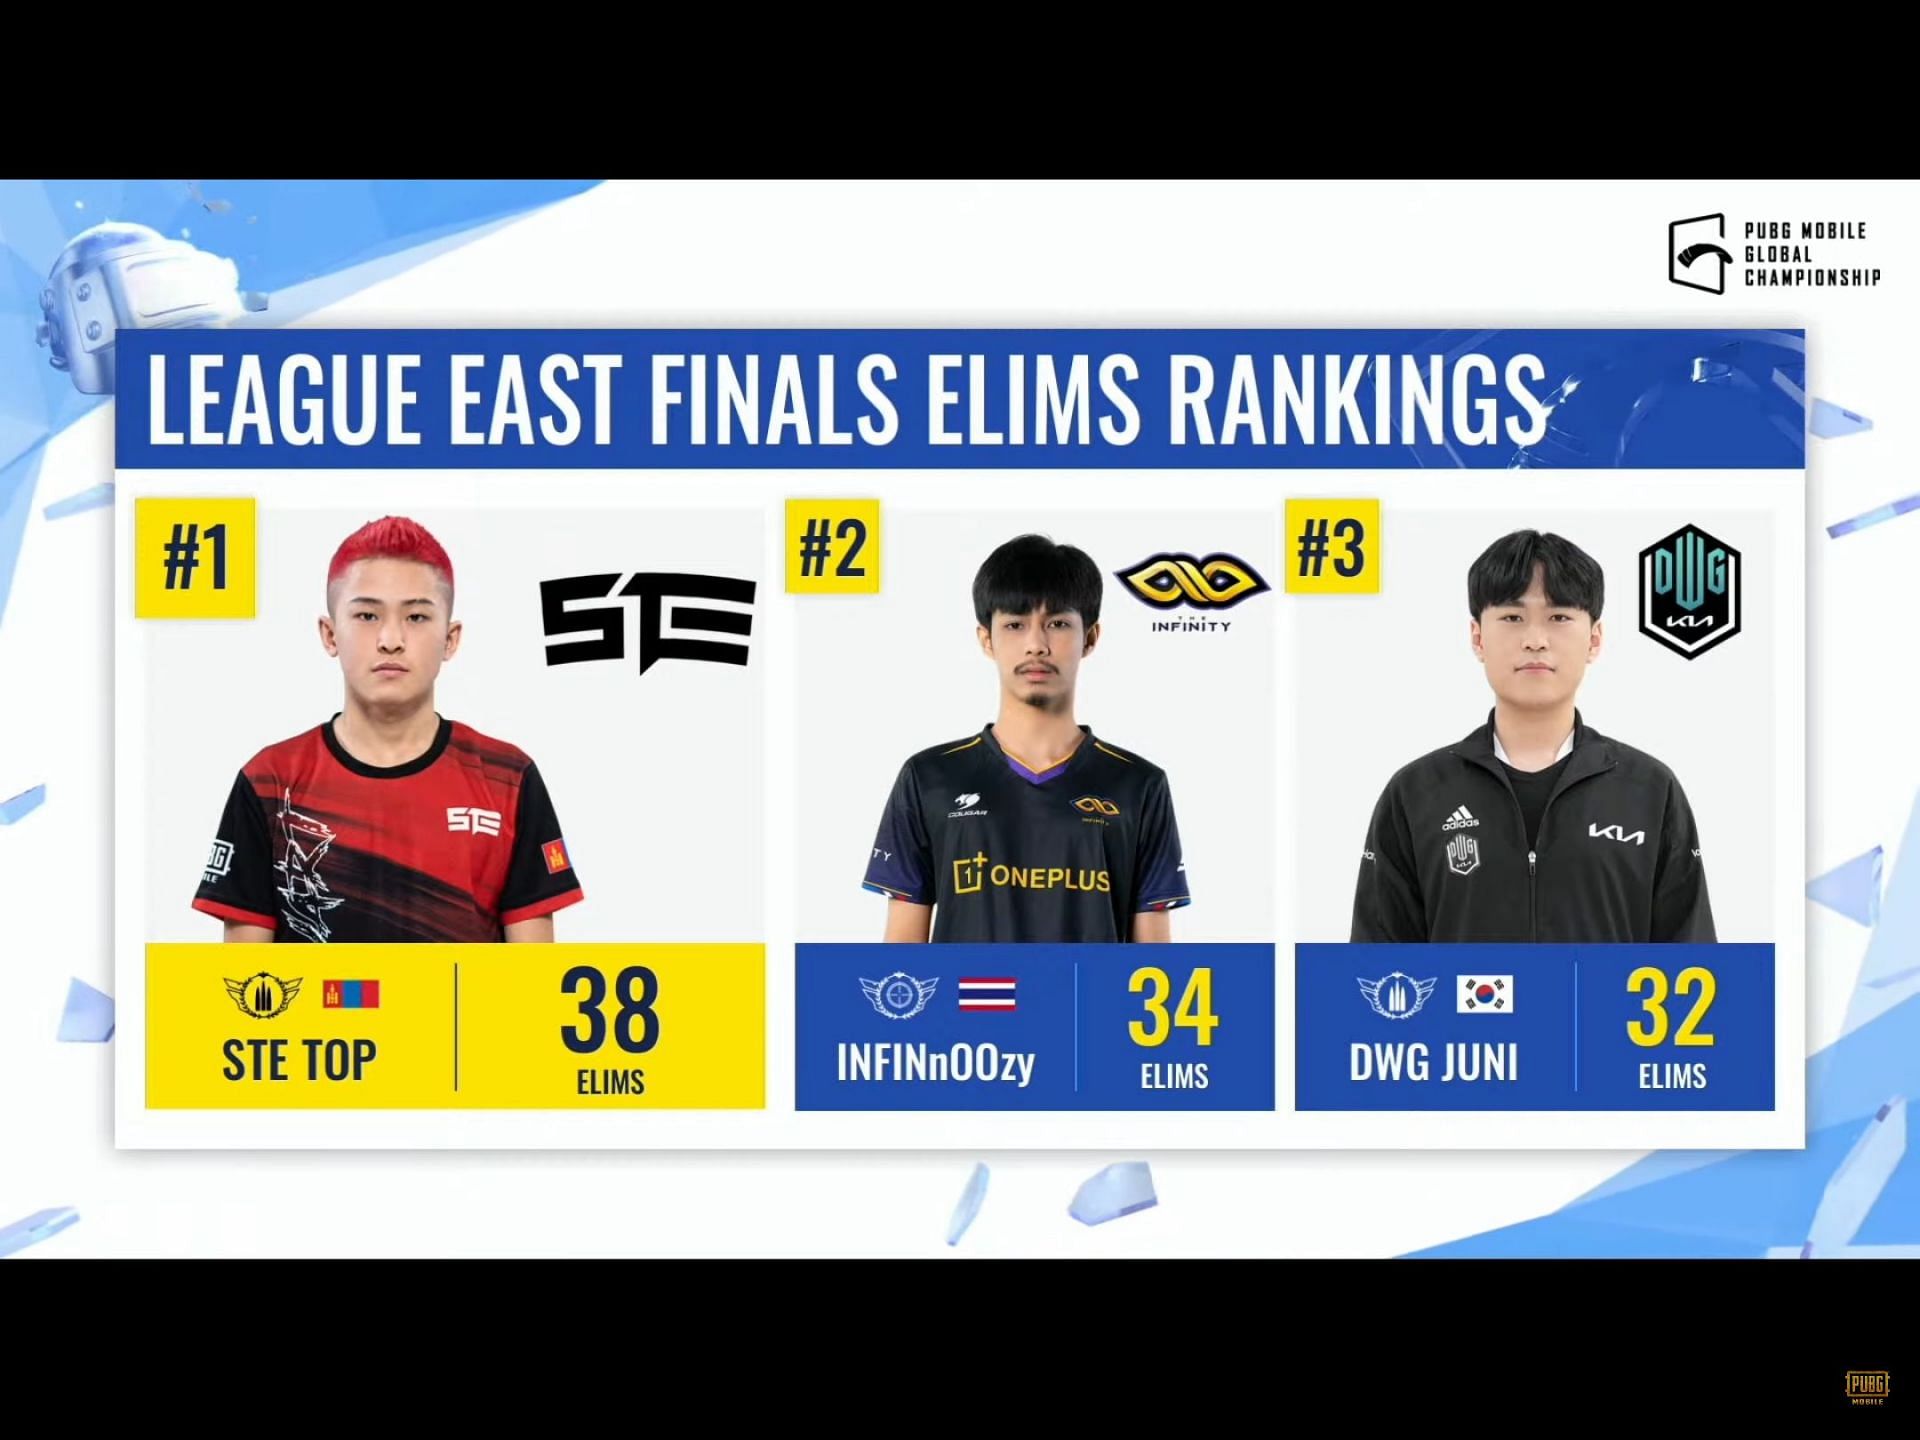 Top 3 players from PMGC League East Finals (Image via PUBG Mobile)